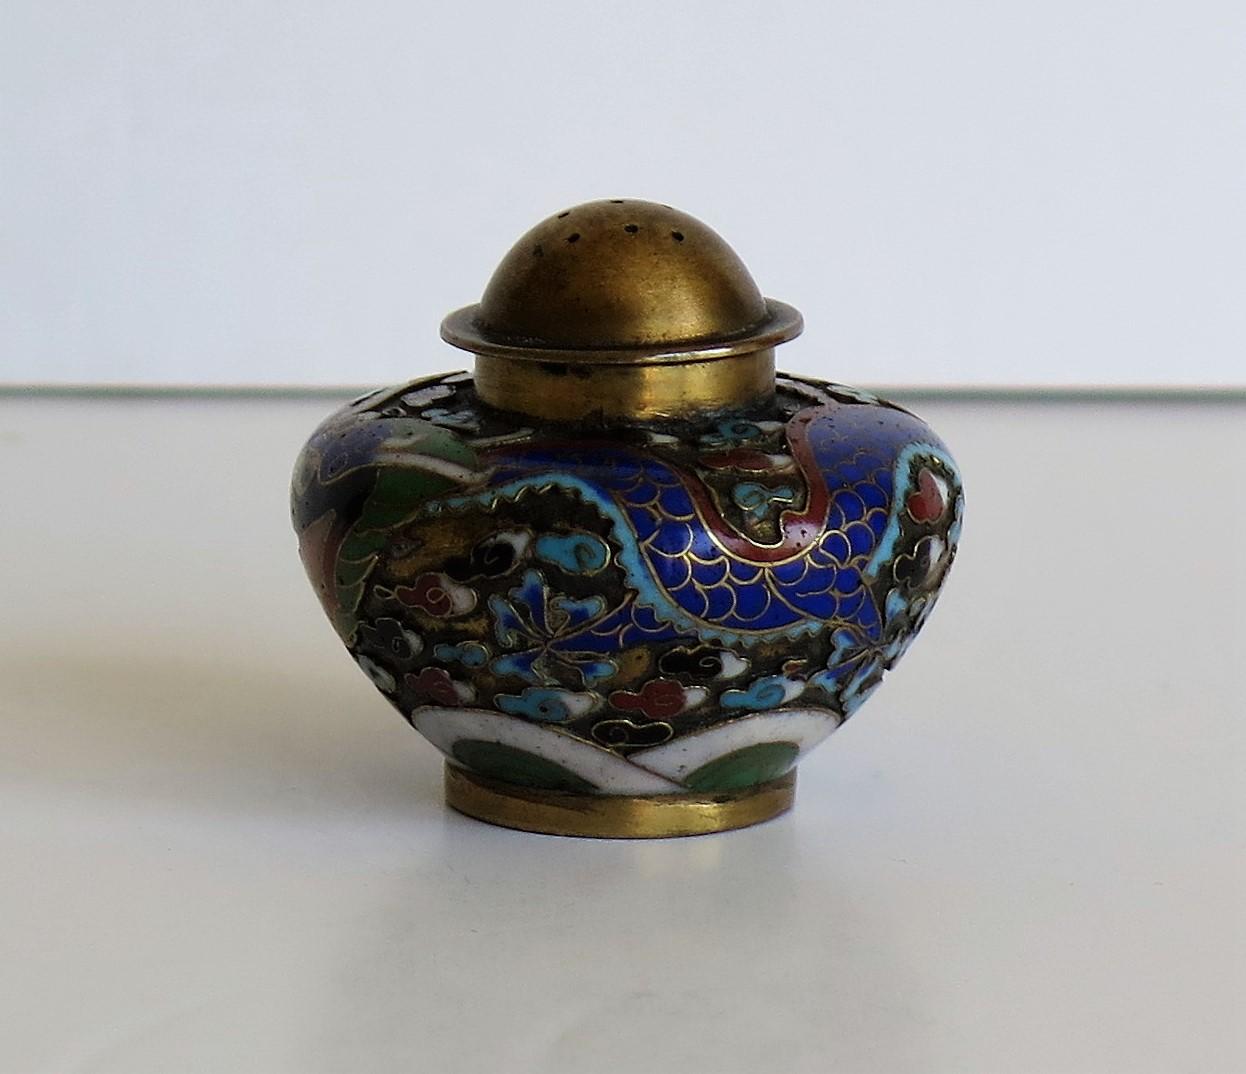 This is a well made very decorative small cloisonné pepper pot, made in China and dating to the mid-19th century.

The pot has a good vase shape on a low foot with a brass/bronze screw top. It has been very well handmade of a brass or bronze alloy